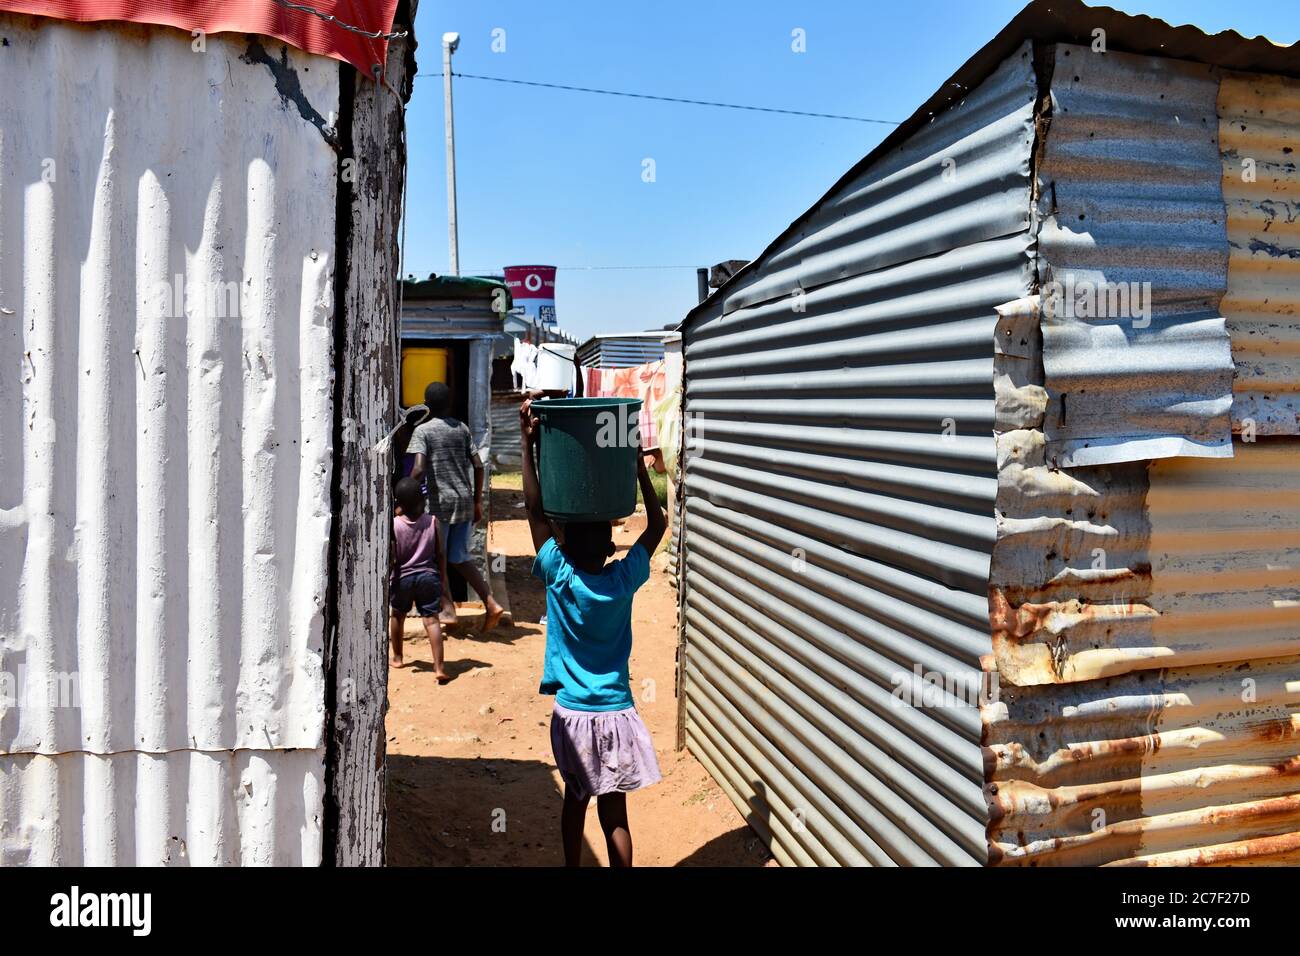 A young girl carries a bucket of water on her head, following her mother and sibling between the slum housing in Soweto, Johannesburg. Stock Photo